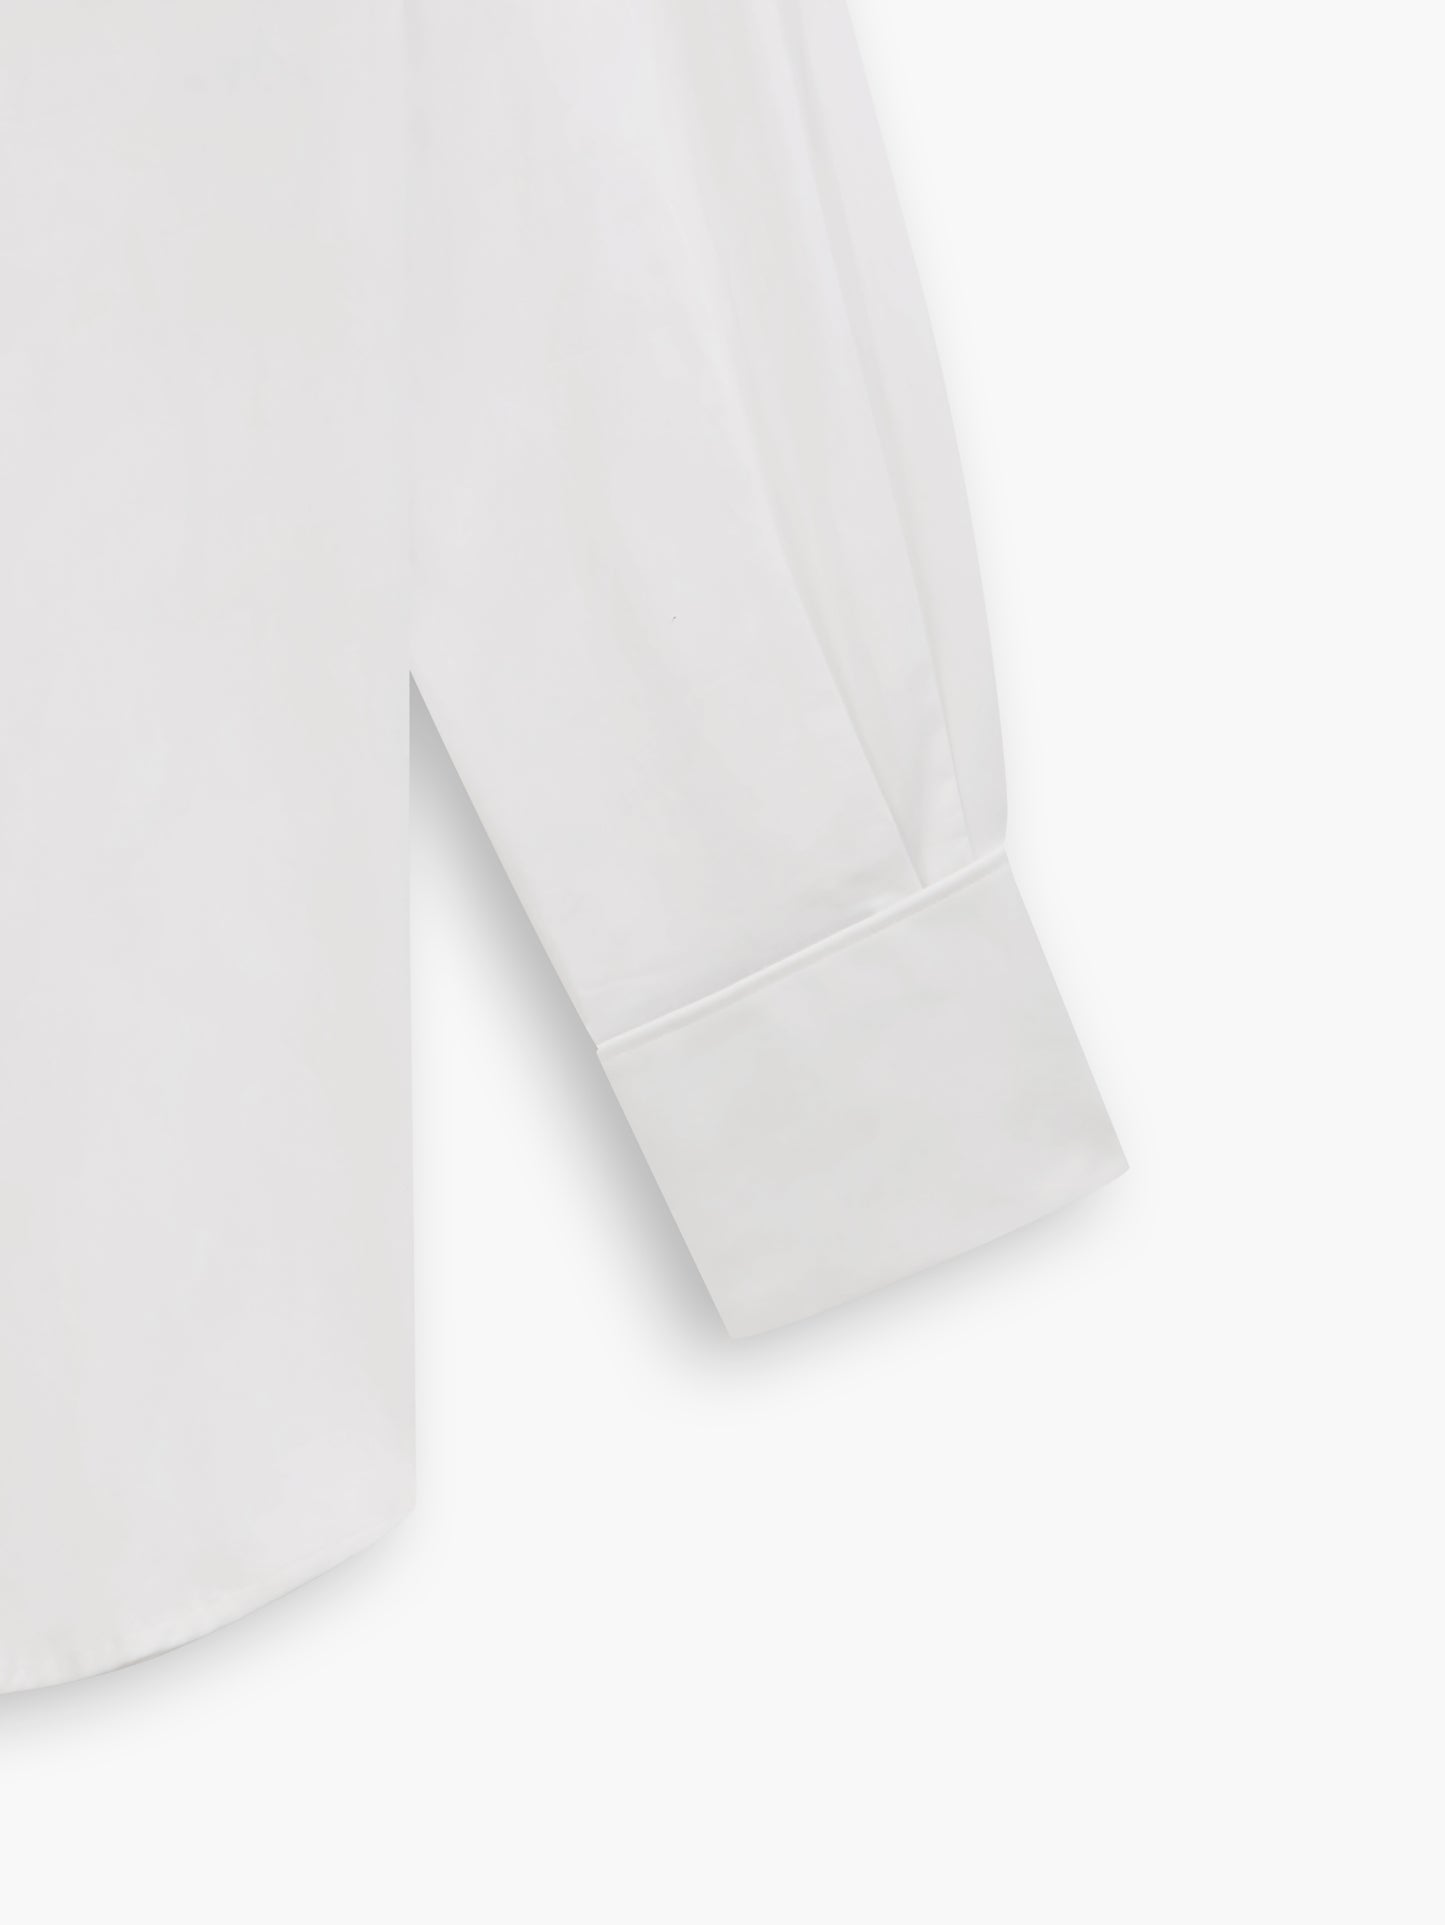 White Stretch Twill Fitted Double Cuff Classic Collar Shirt